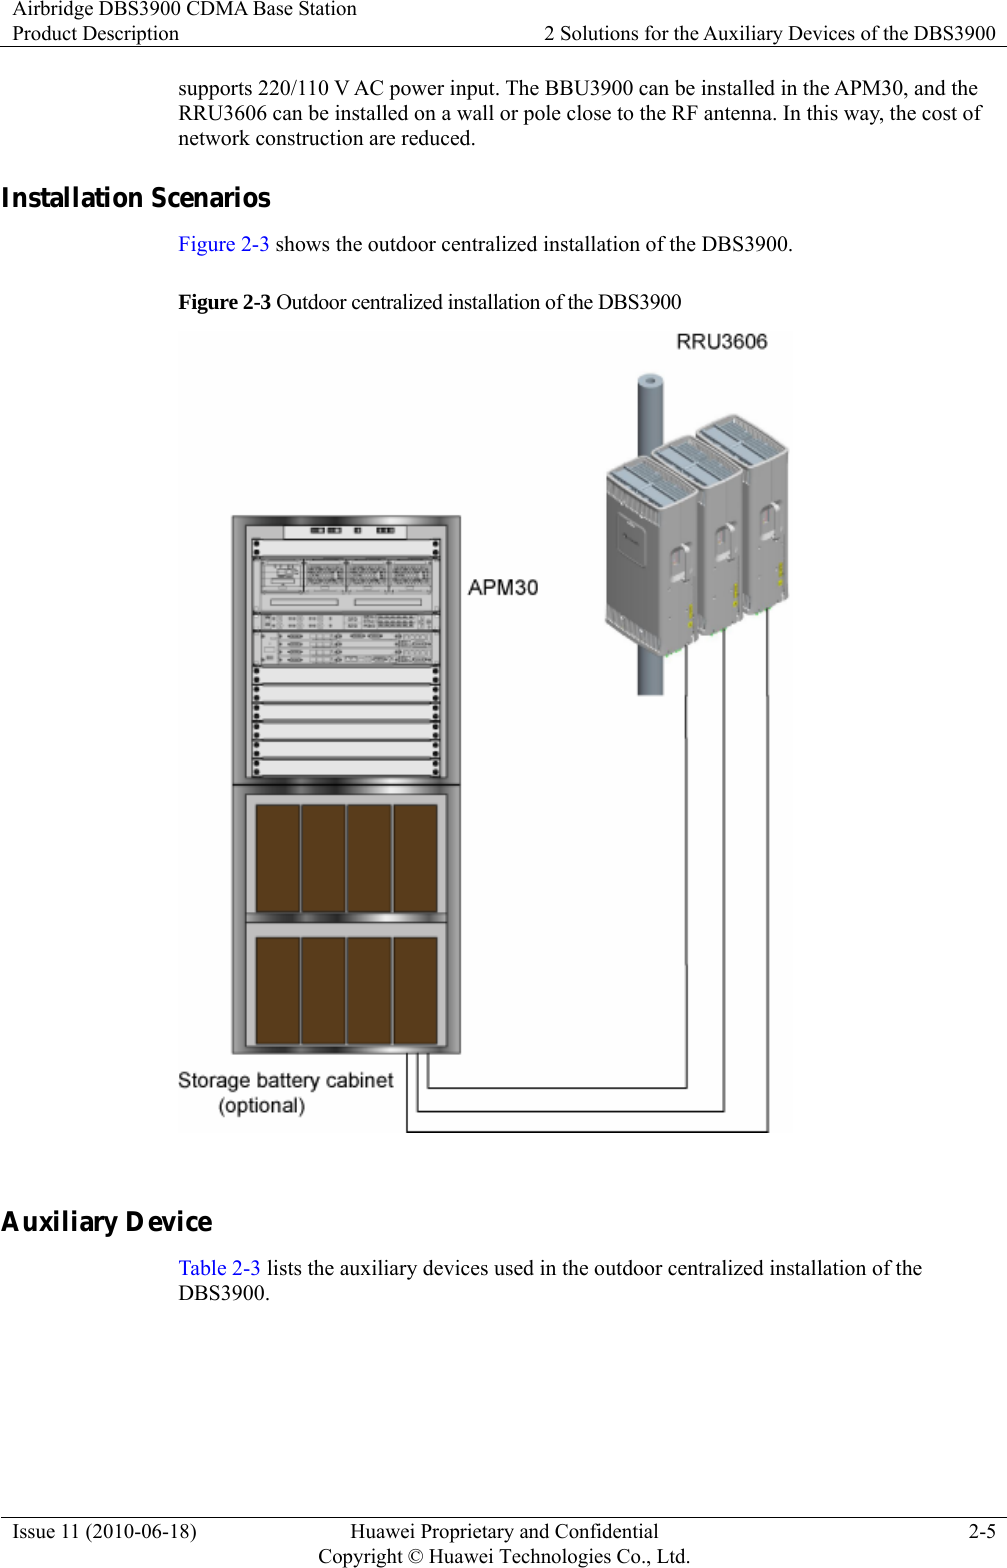 Airbridge DBS3900 CDMA Base Station Product Description  2 Solutions for the Auxiliary Devices of the DBS3900 Issue 11 (2010-06-18)  Huawei Proprietary and Confidential         Copyright © Huawei Technologies Co., Ltd.2-5 supports 220/110 V AC power input. The BBU3900 can be installed in the APM30, and the RRU3606 can be installed on a wall or pole close to the RF antenna. In this way, the cost of network construction are reduced. Installation Scenarios Figure 2-3 shows the outdoor centralized installation of the DBS3900. Figure 2-3 Outdoor centralized installation of the DBS3900   Auxiliary Device Table 2-3 lists the auxiliary devices used in the outdoor centralized installation of the DBS3900. 